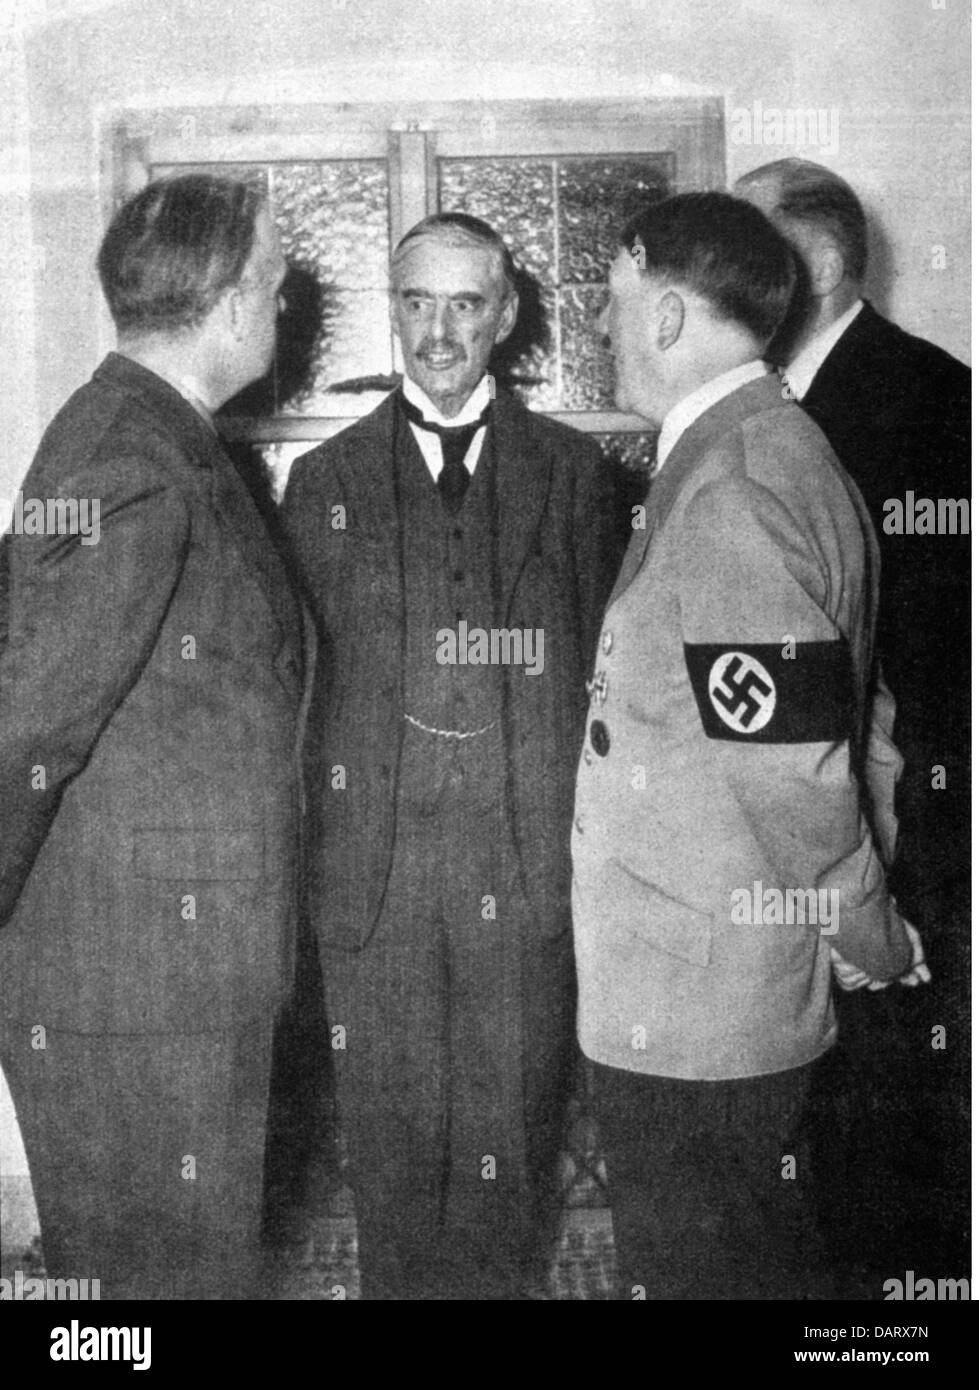 Chamberlain, Arthur Neville, 18.3.1869 - 9.11.1940, British politician,  (, Conservative), Prime Minister 20.5.1937 - 10.5.1940, visit to Germany, with Chancellor of the Reich Adolf Hitler and ambassador Joachim von Ribbentrop, Berghof, Obersalzberg, 15.9.1938, Stock Photo